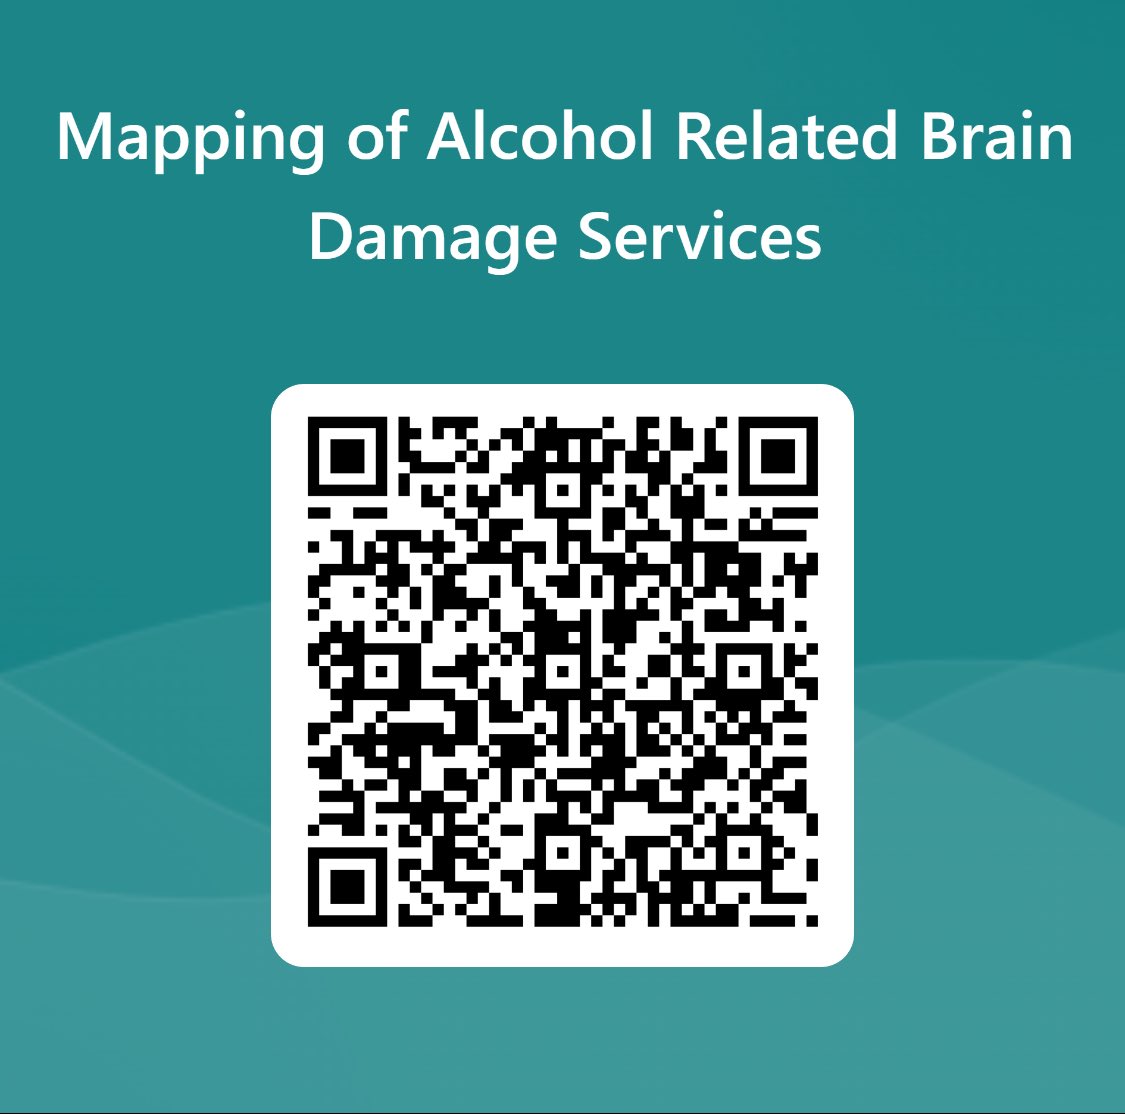 Help us increase our understanding of service provision for individuals living with alcohol related brain damage #arbd by completing the following survey: forms.office.com/e/SDQuSW1A3W 🧑🏽‍💻📈🔍💜